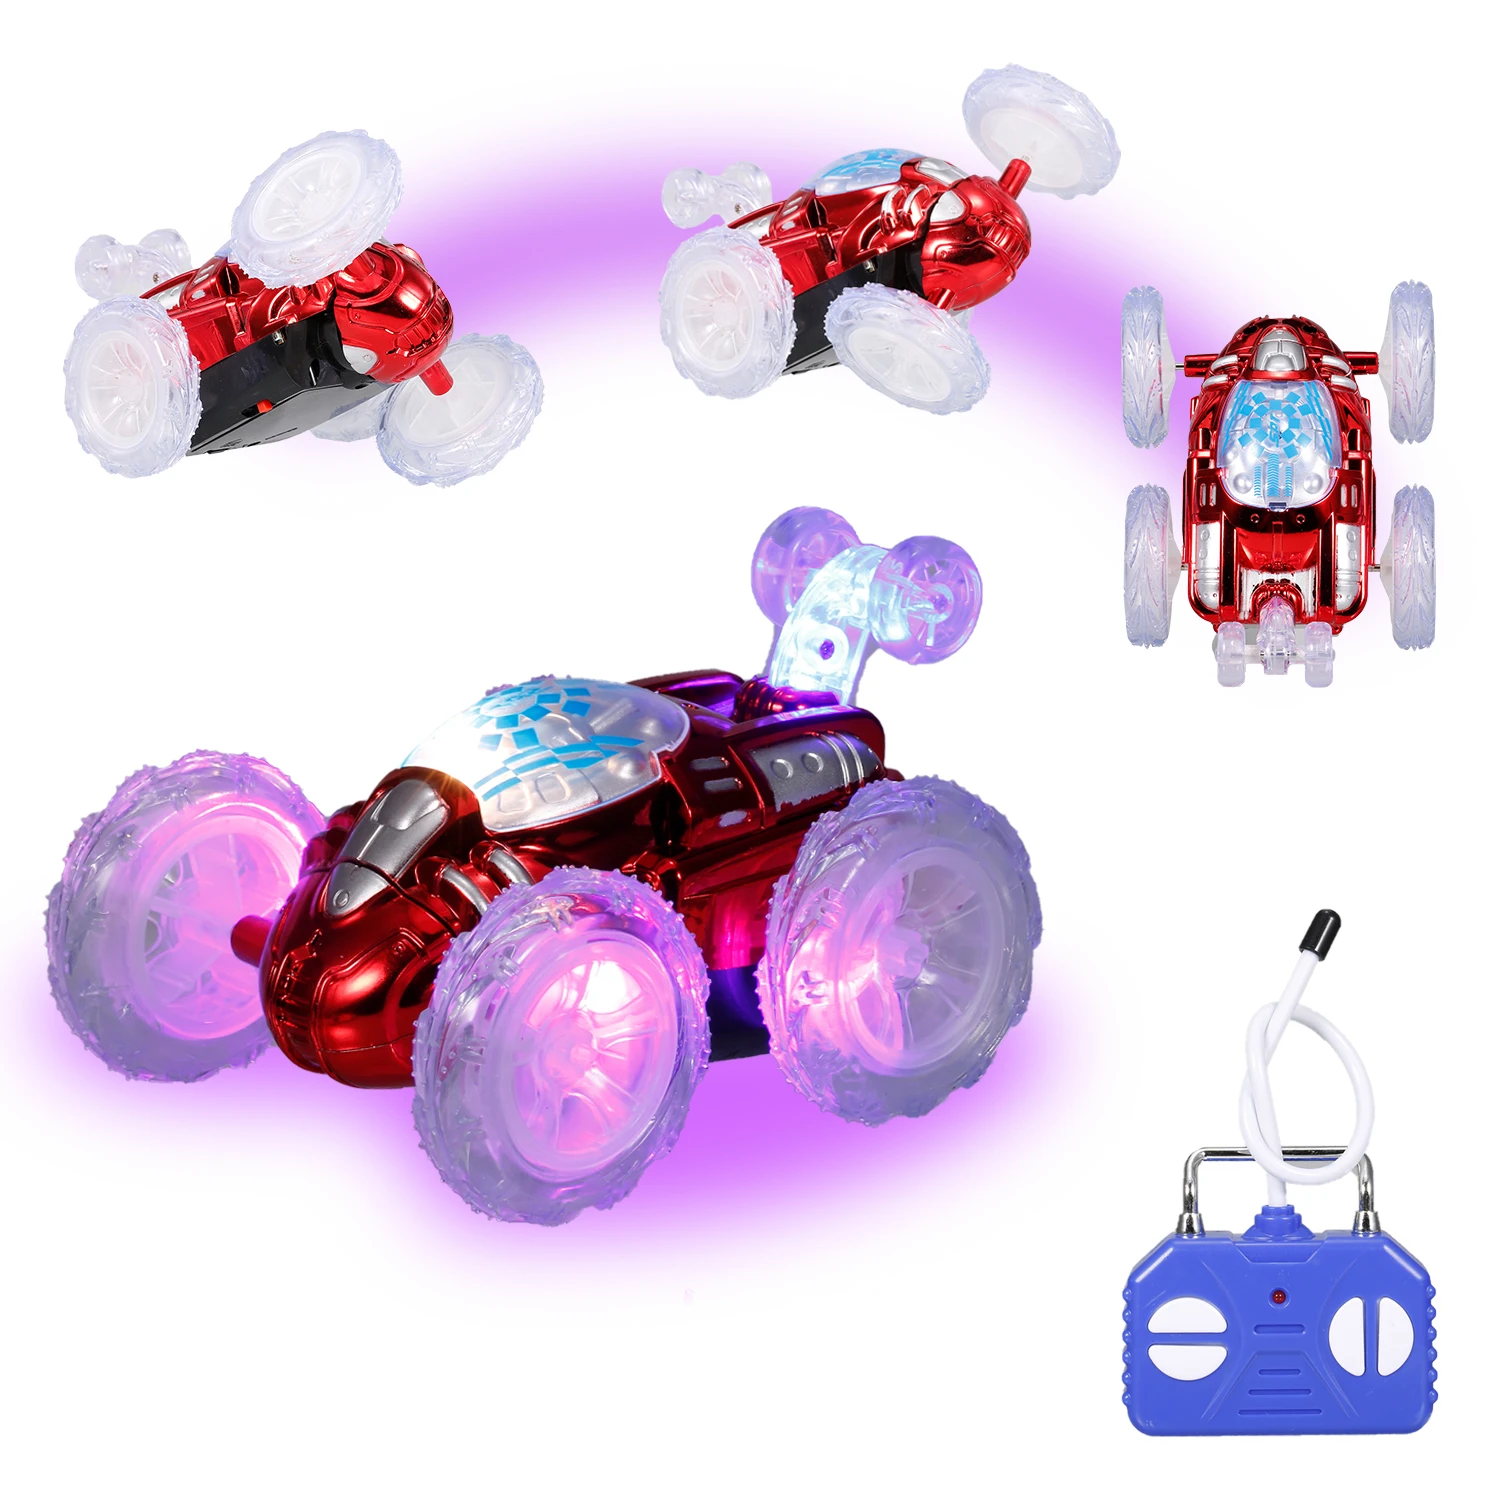 remote control car 999G-27A Remote Control Stunt Car RC Car Toy with Flashing LED Lights 360° Tumbling Mini RC Model Toys Gifts for Kids Children remote control car